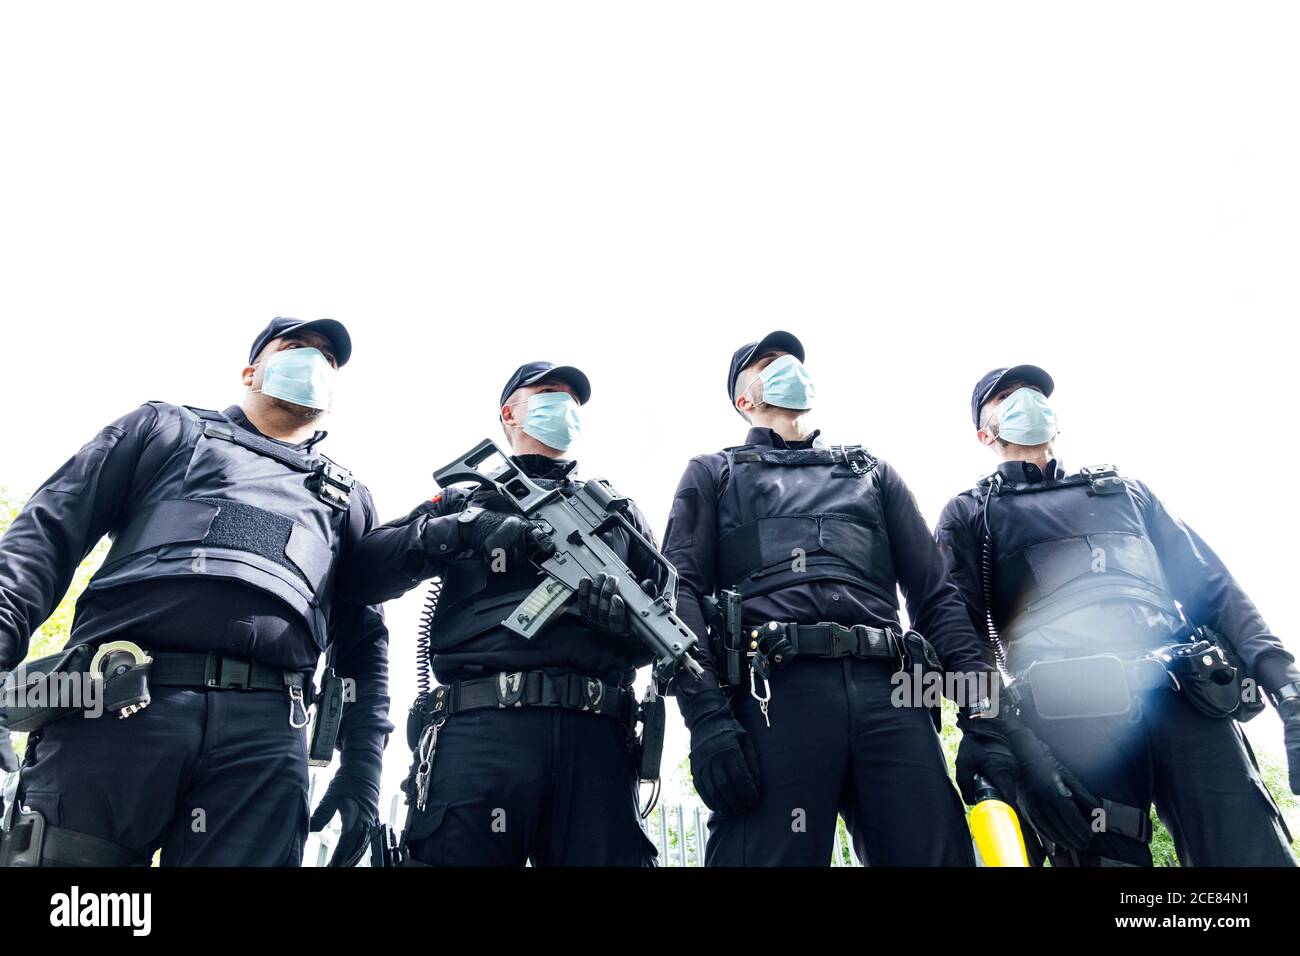 Full body squad of Spanish police officers in protective gears with guns wearing medical masks during patrolling street Stock Photo